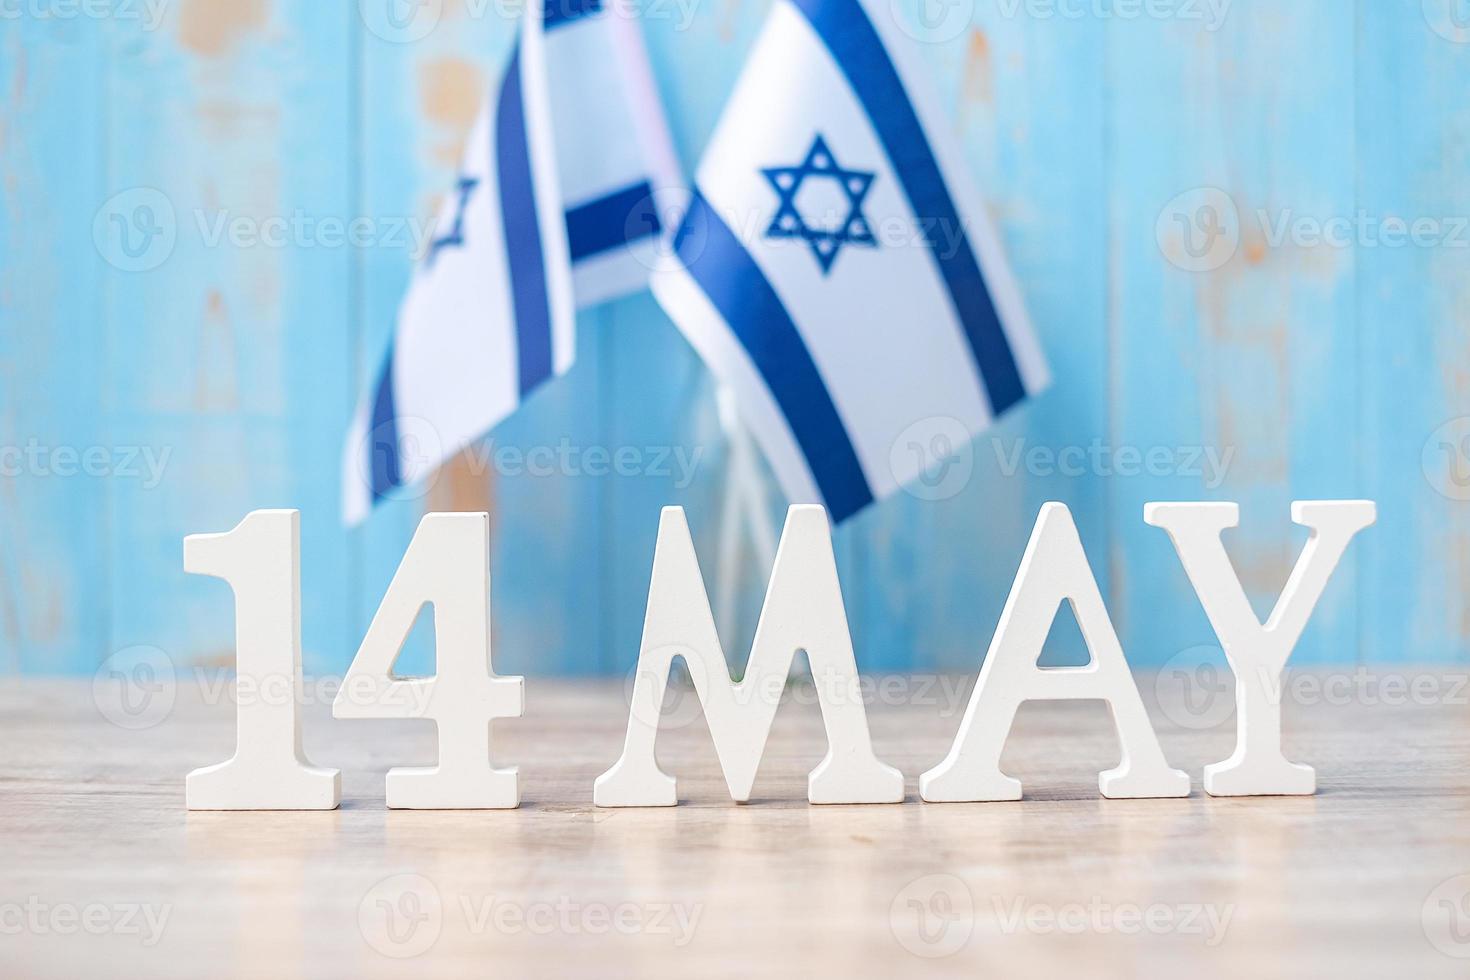 Wooden text of May 14th with Israel flags. Israel Independence day and happy celebration concepts photo